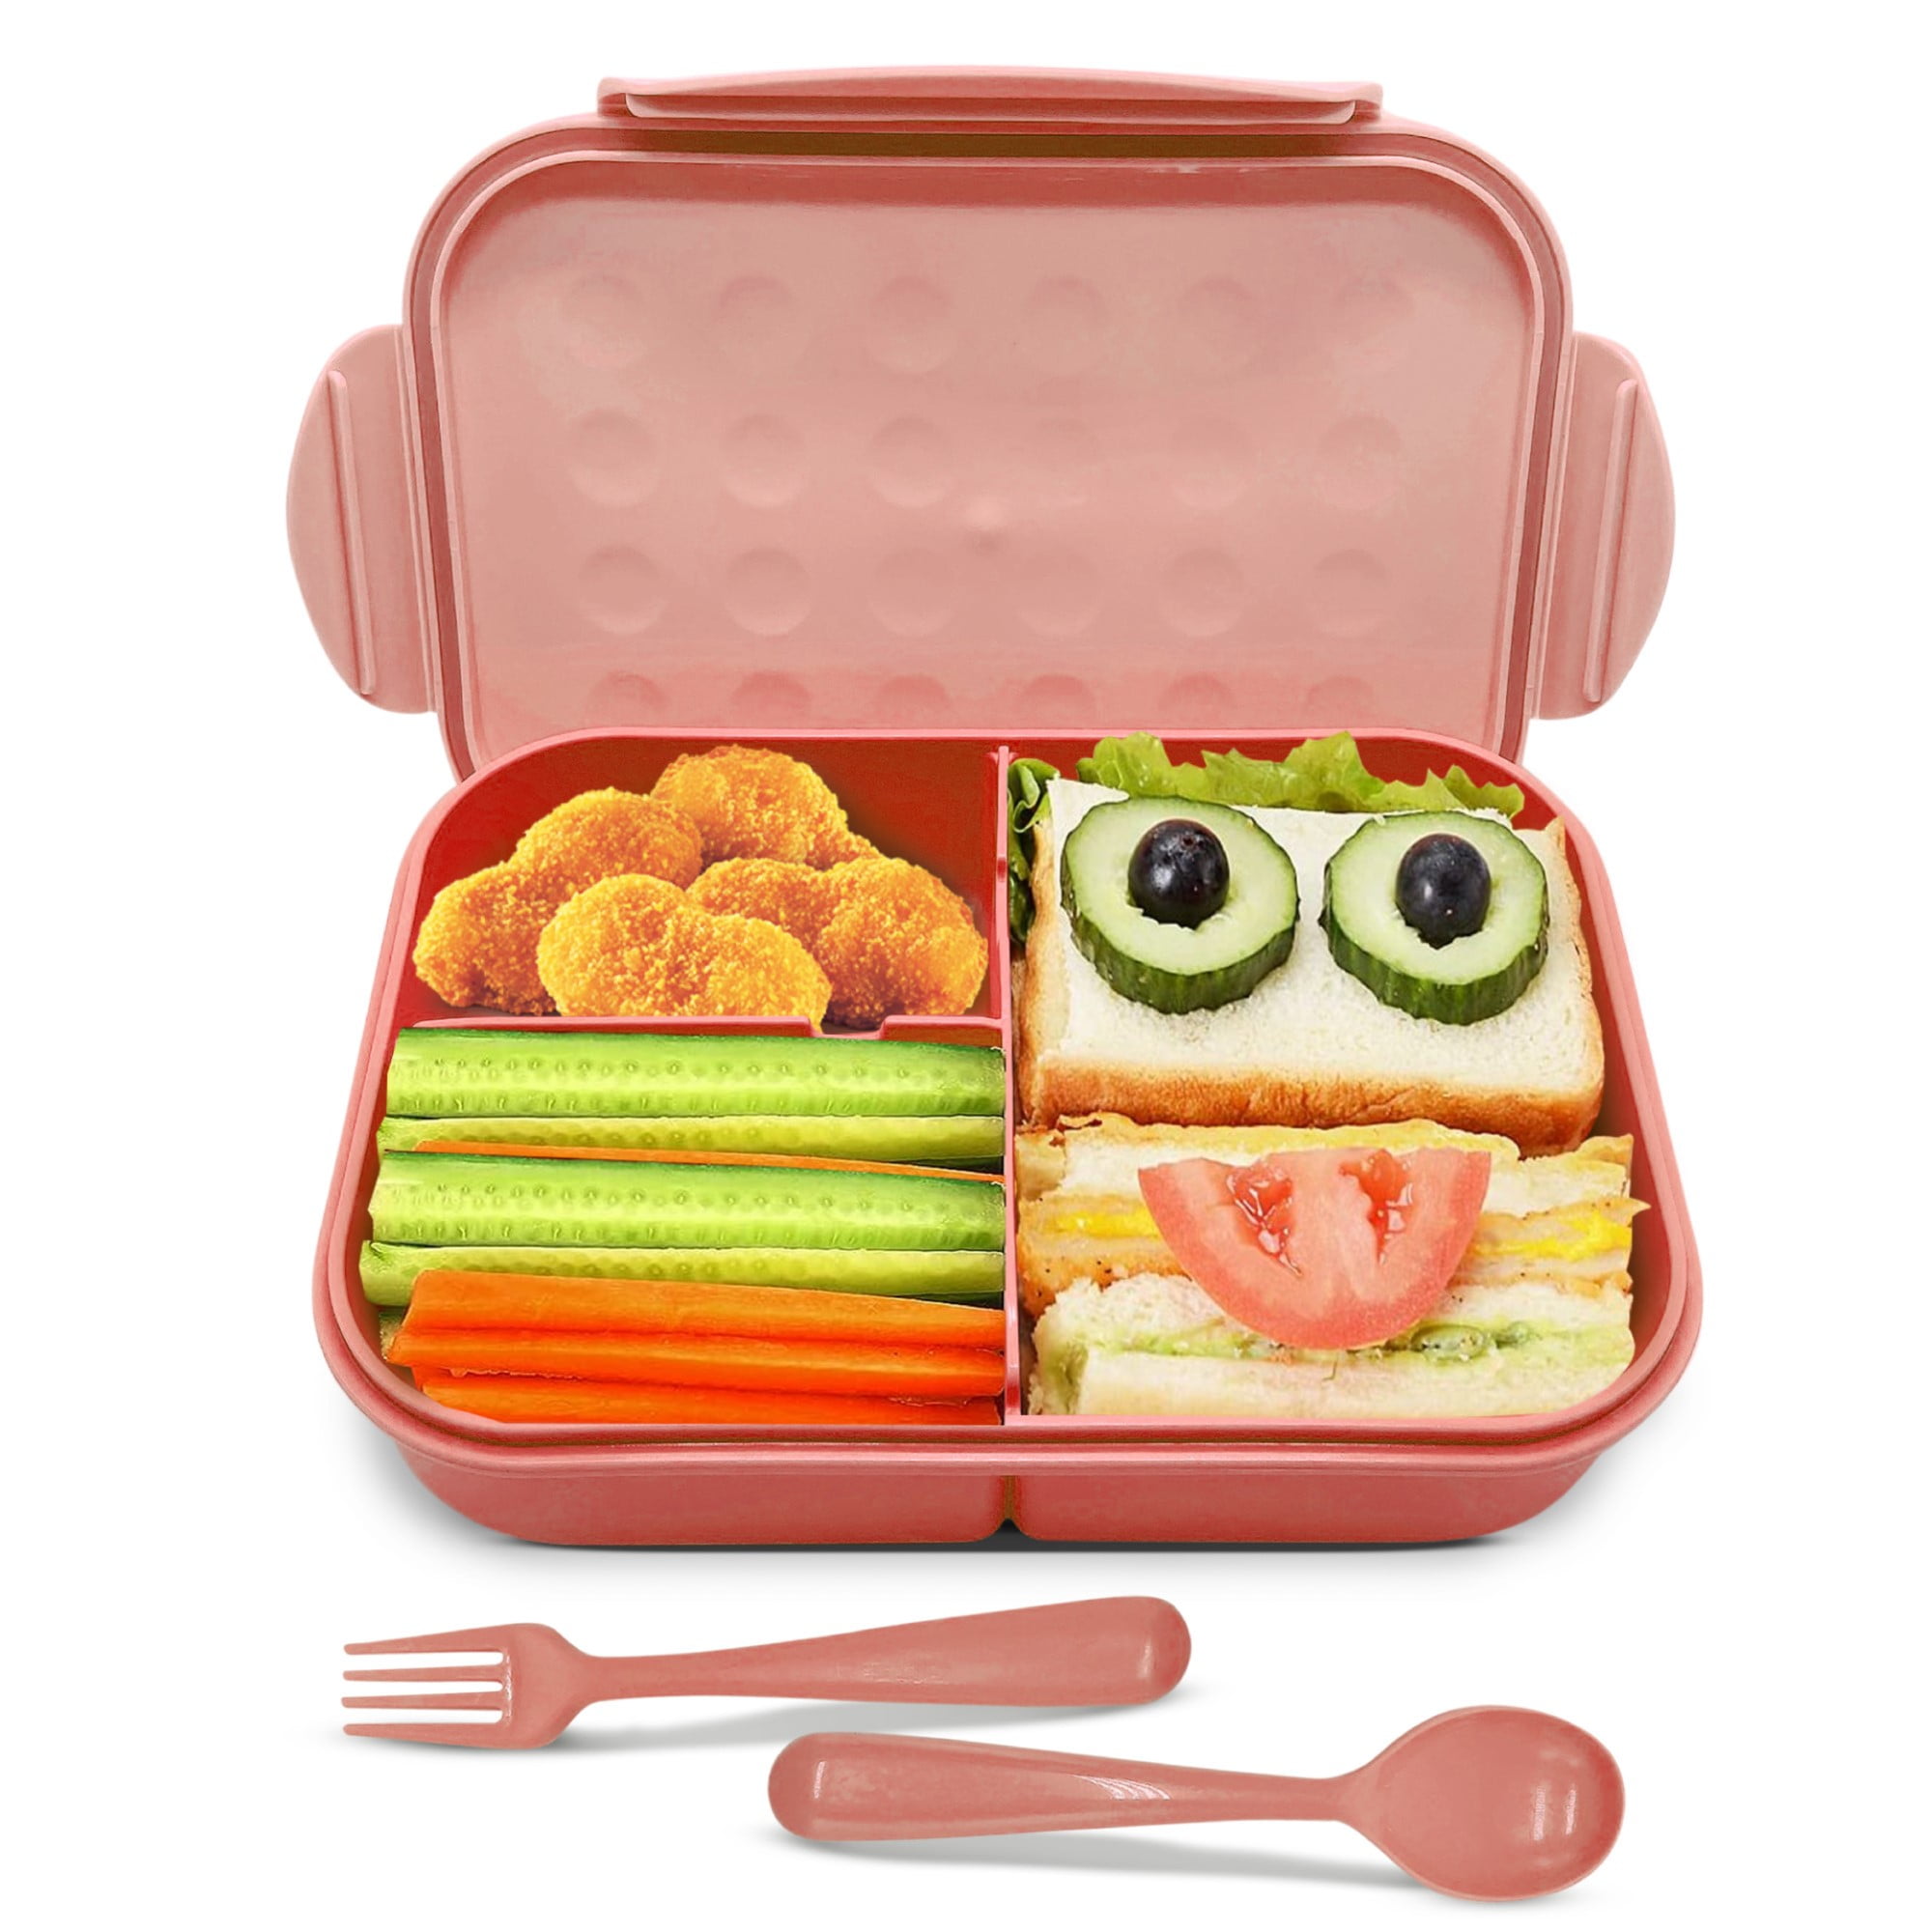 New Year Reset, Dvkptbk Lunch Box Kids,Bento Box Adult Lunch Box,Lunch  Containers For Adults/Kids/Toddler,1200ML-5 Compartment Bento Lunch